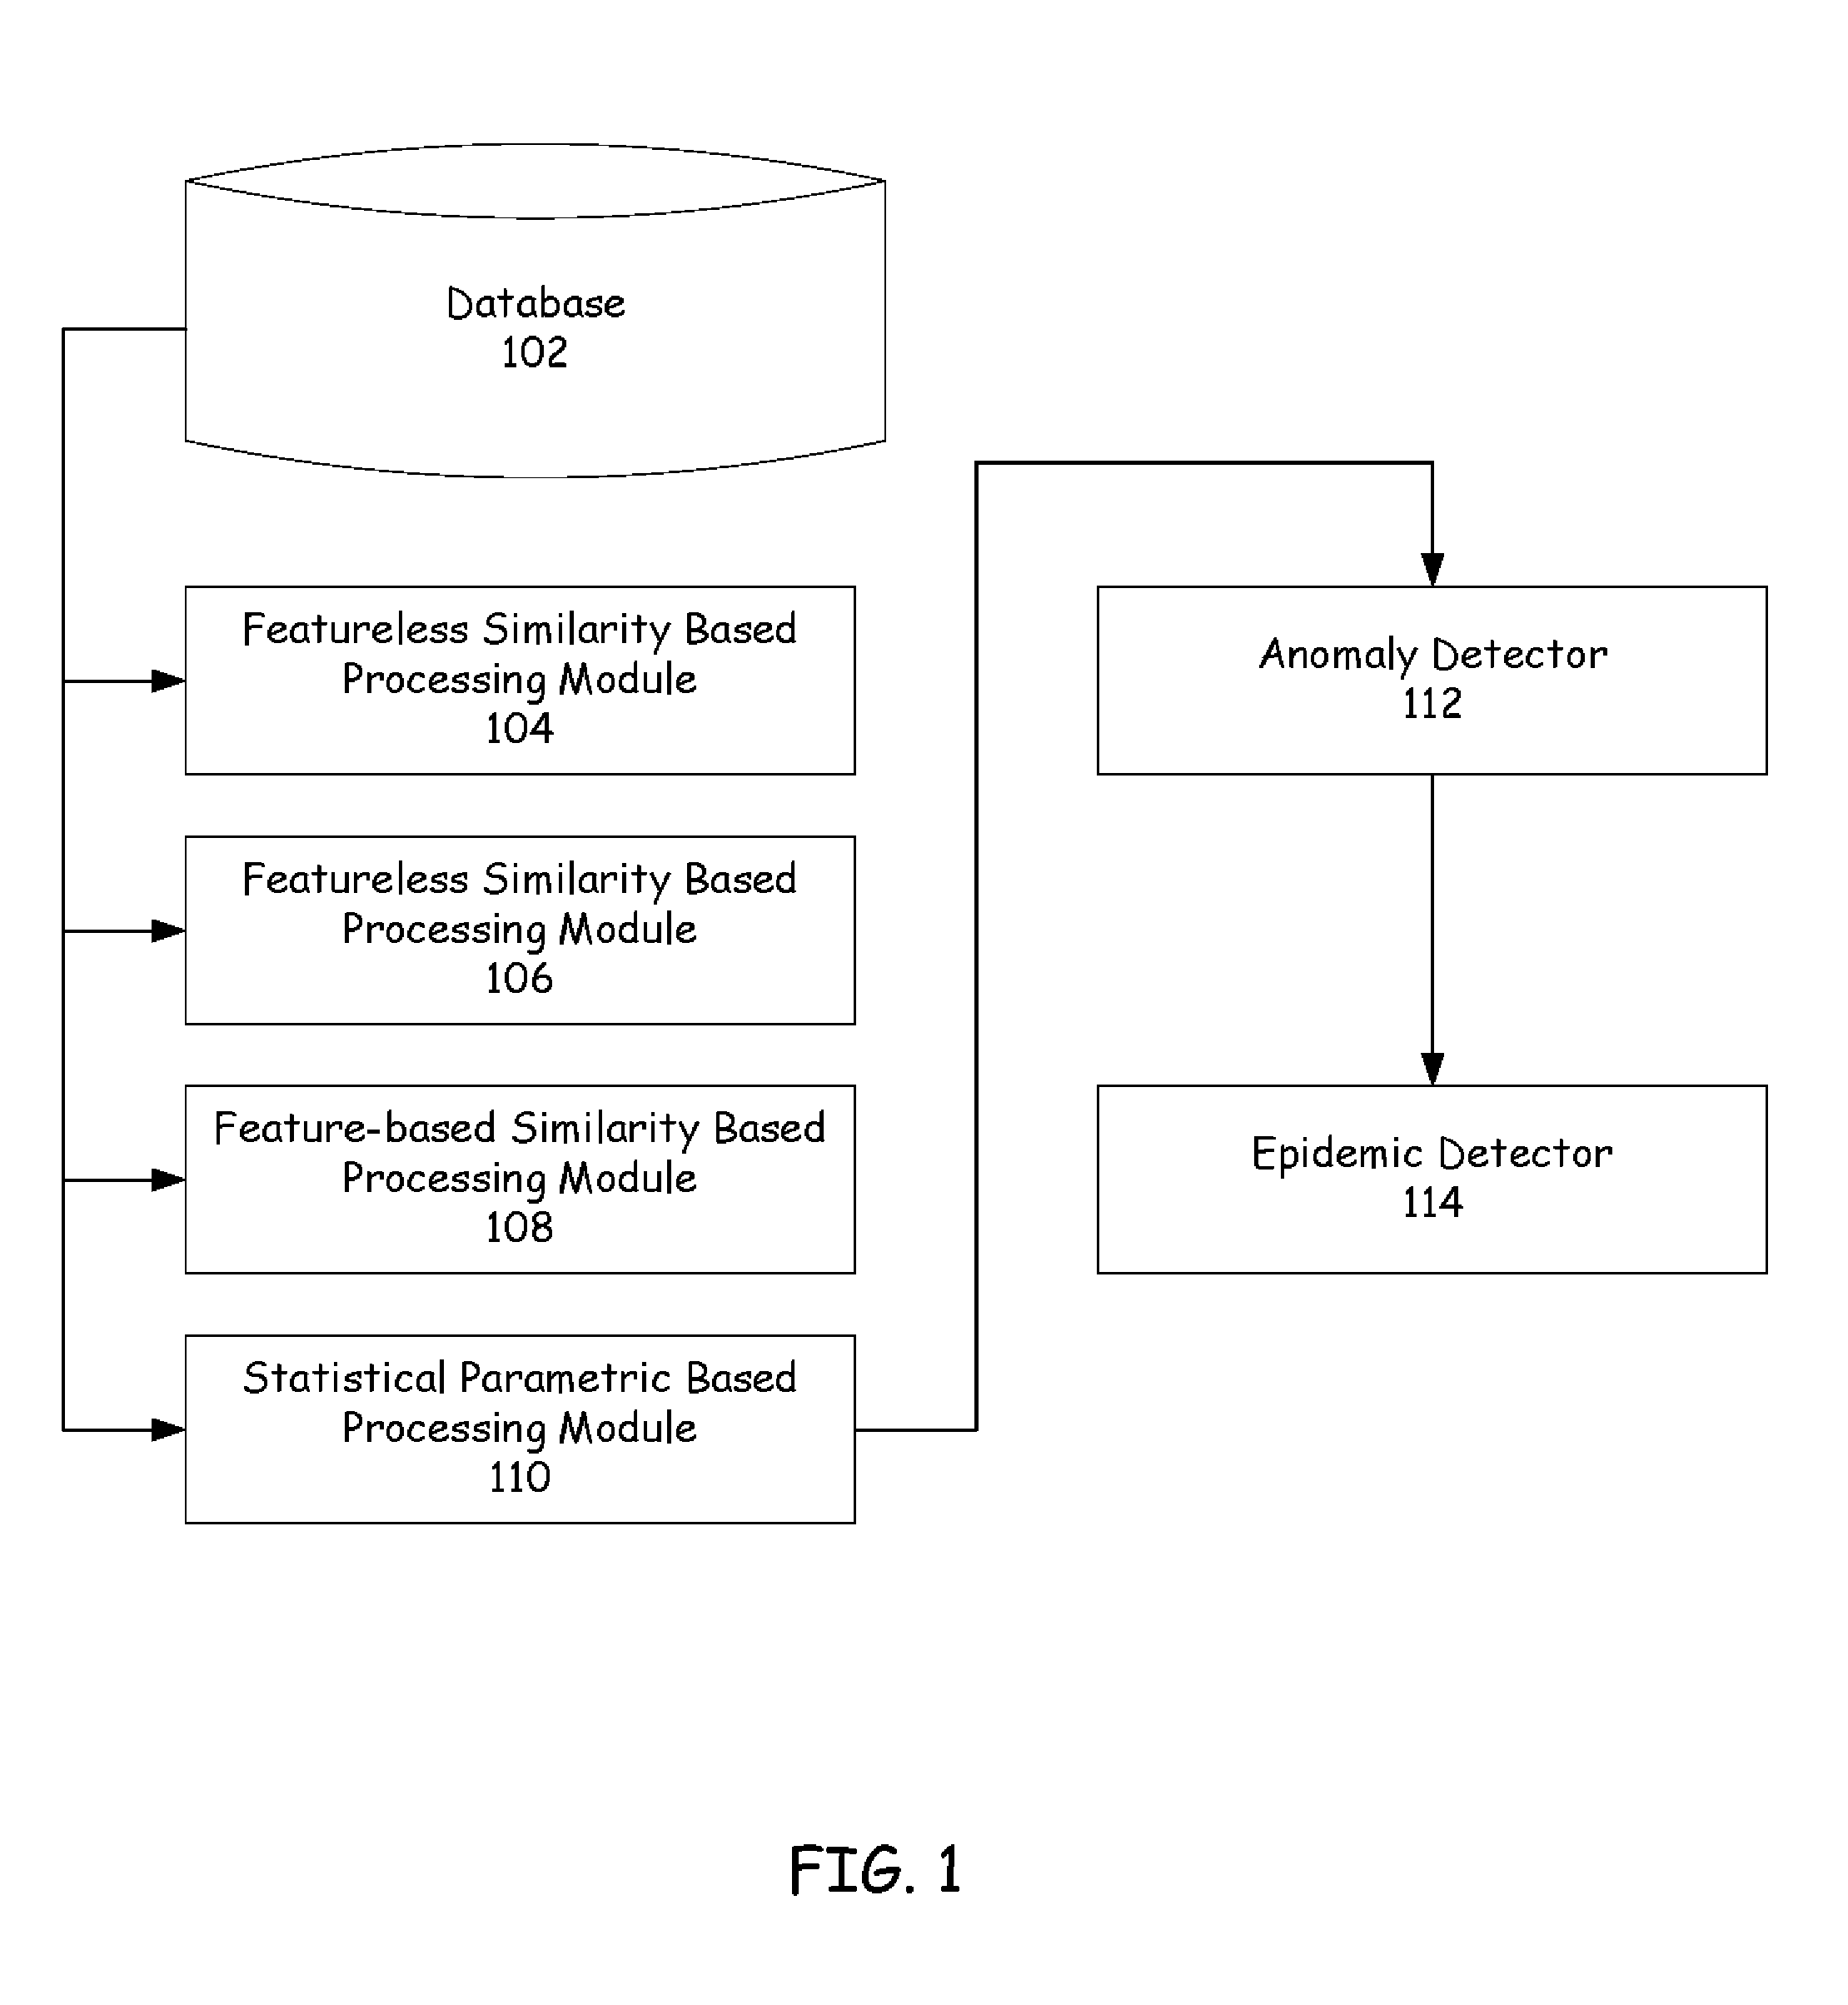 System and method for defining normal operating regions and identifying anomalous behavior of units within a fleet, operating in a complex, dynamic environment